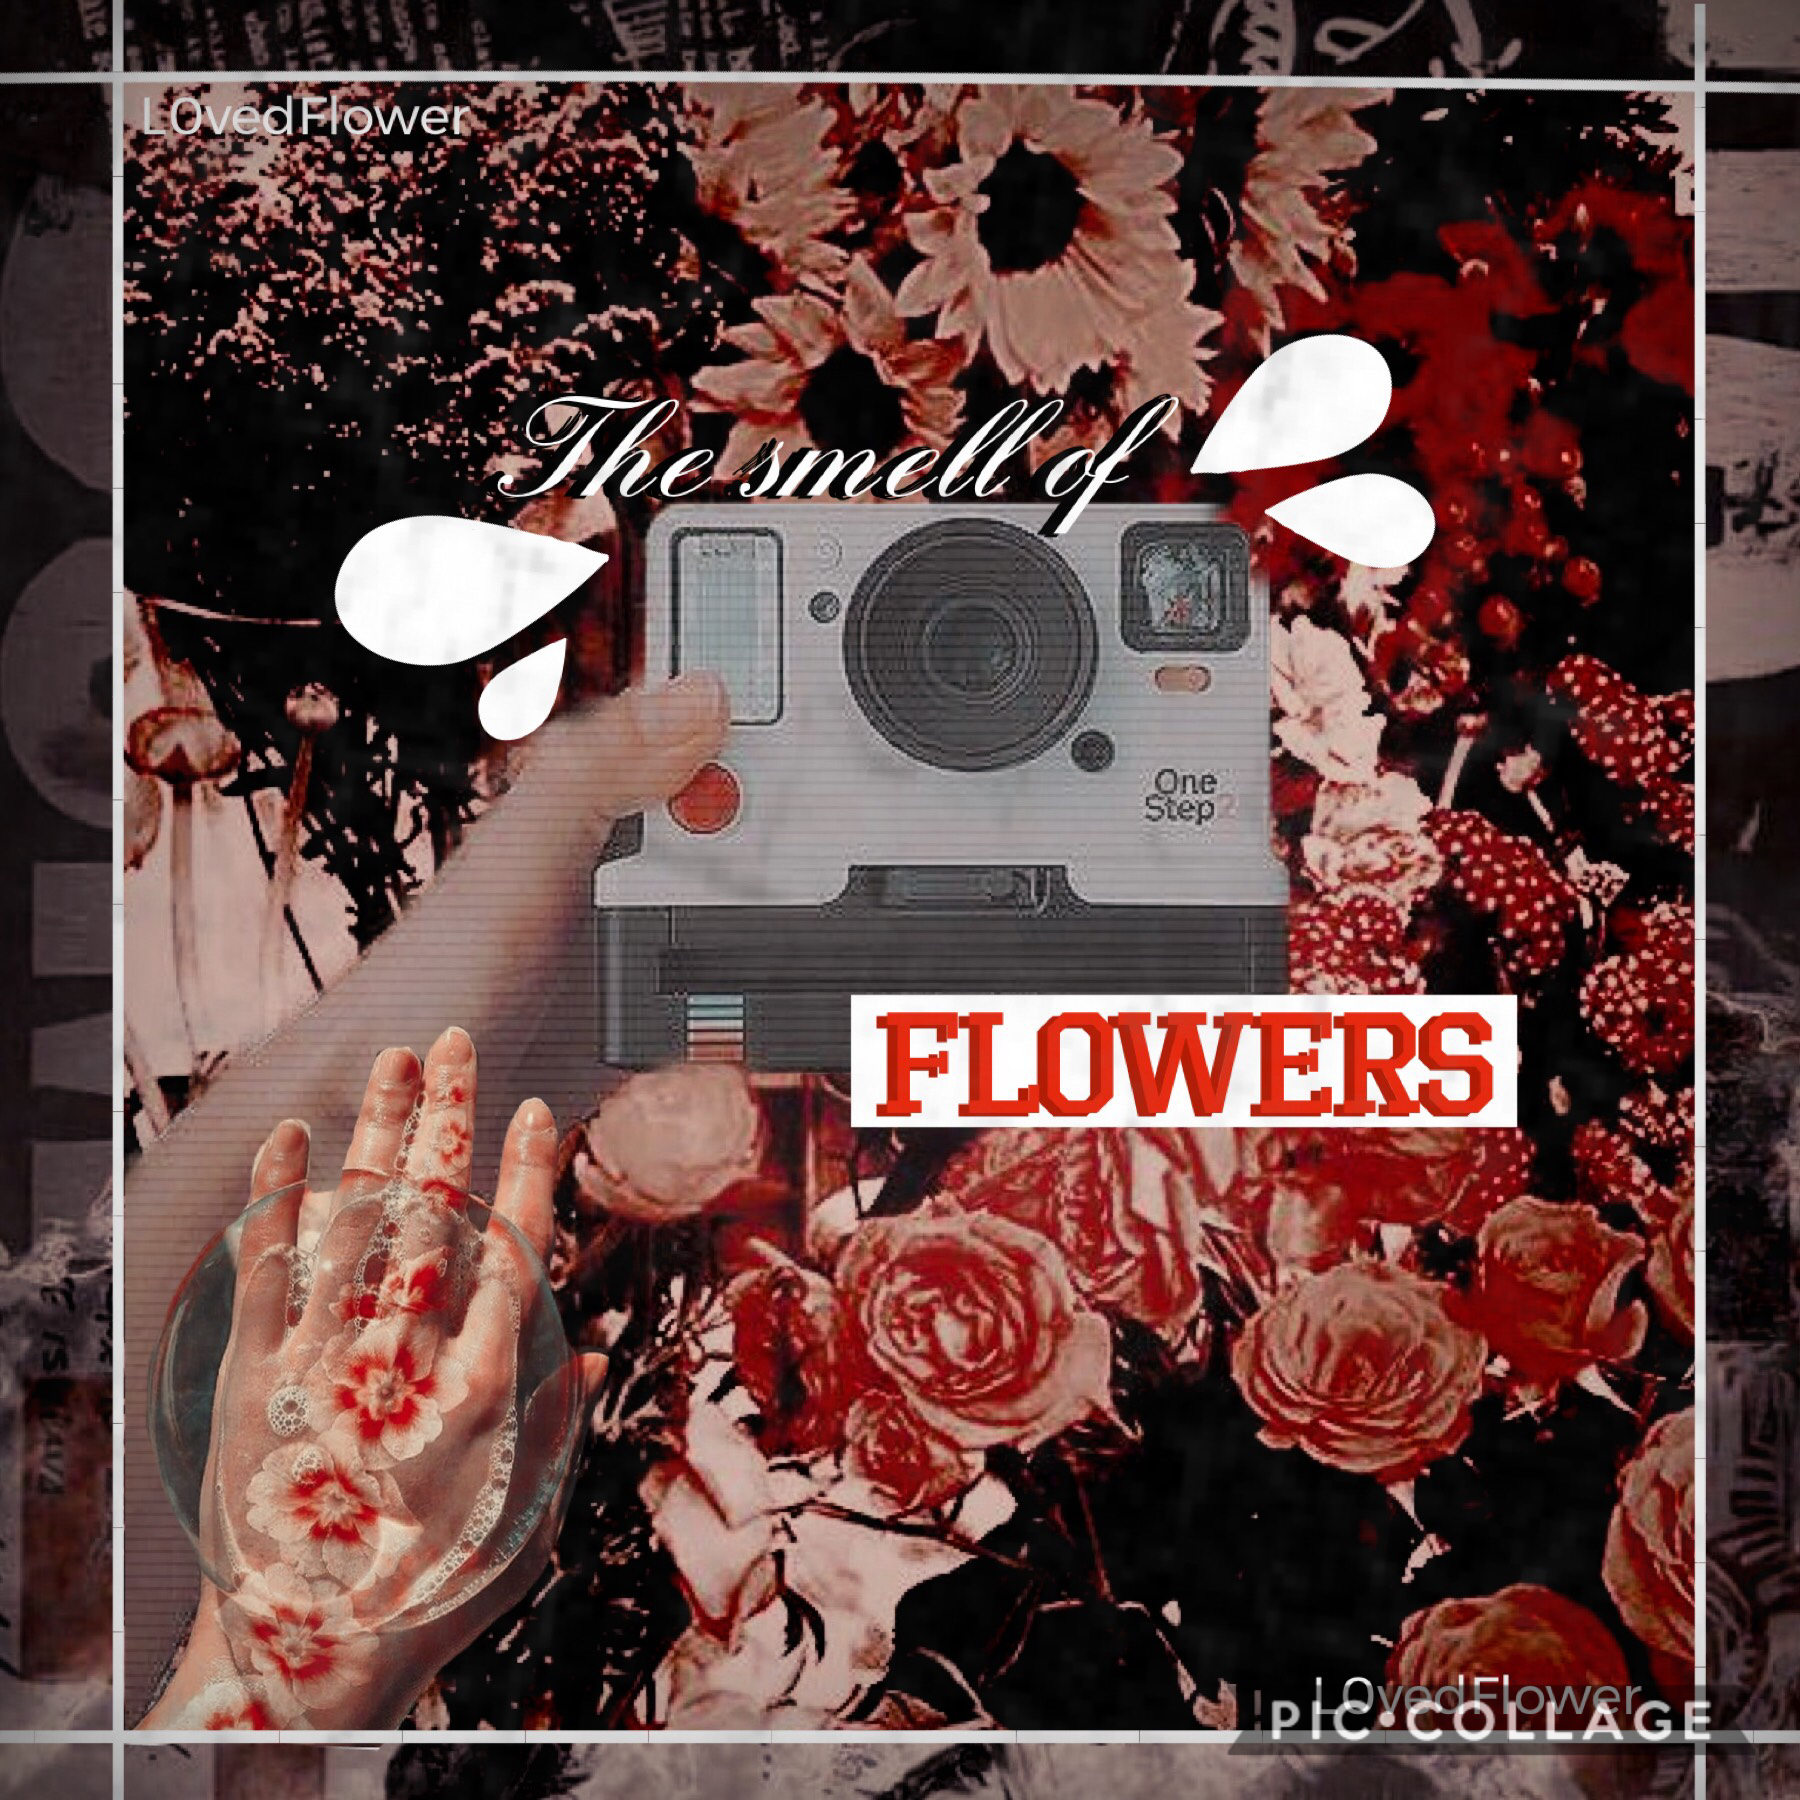 🌹✰ [click] ✰🌹 
🌹✰ I just randomly thought of this quote ✰🌹
🌹✰ “the smell of flowers” ✰🌹
🌹✰ flowers smell beautiful so yeah.. Hope you like this! ✰🌹